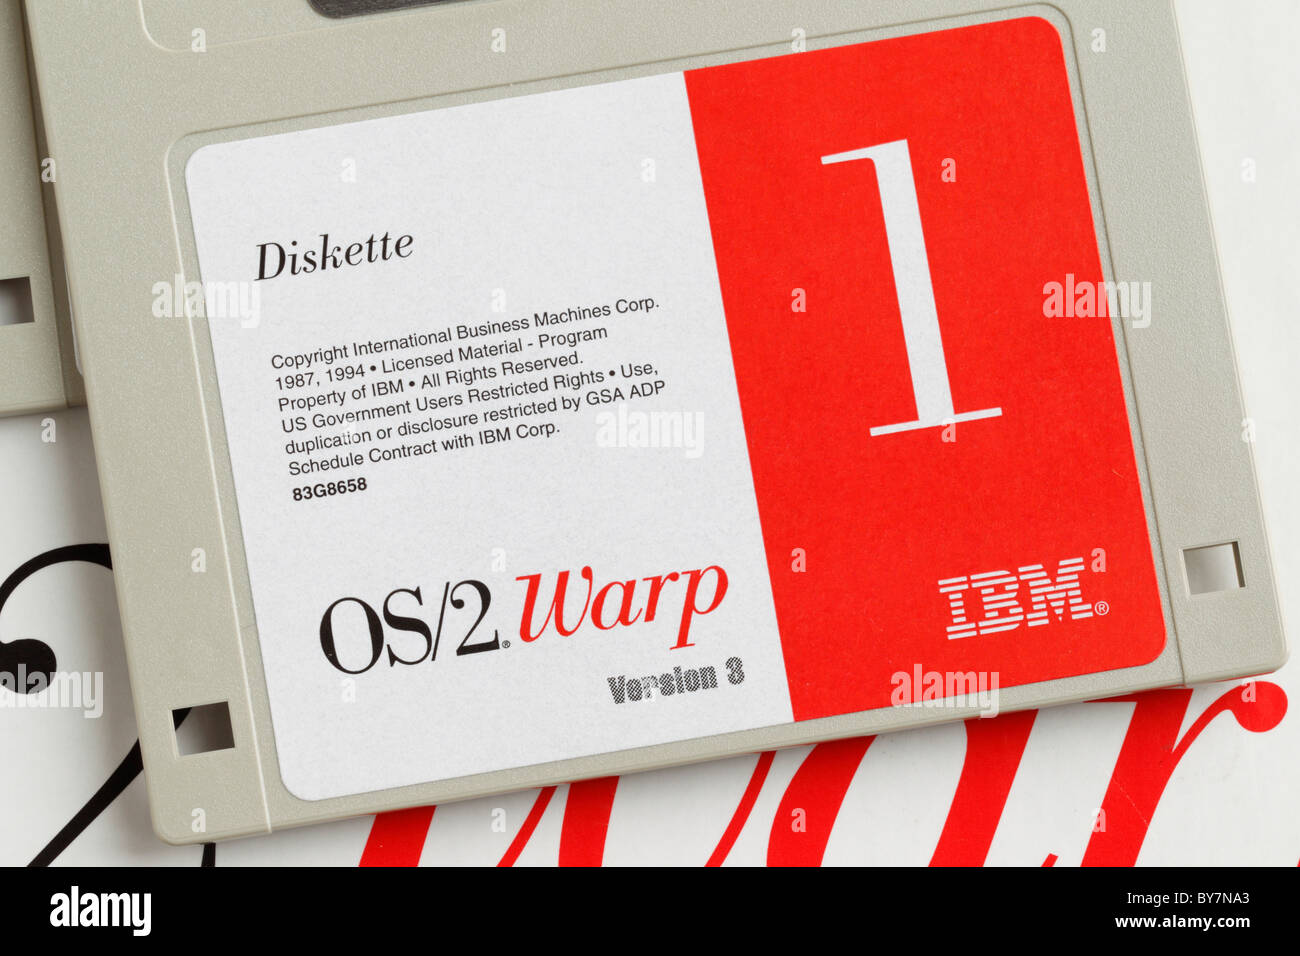 A 3.5' installation diskette from IBM's OS/2 PC operating system software - Warp version. Stock Photo